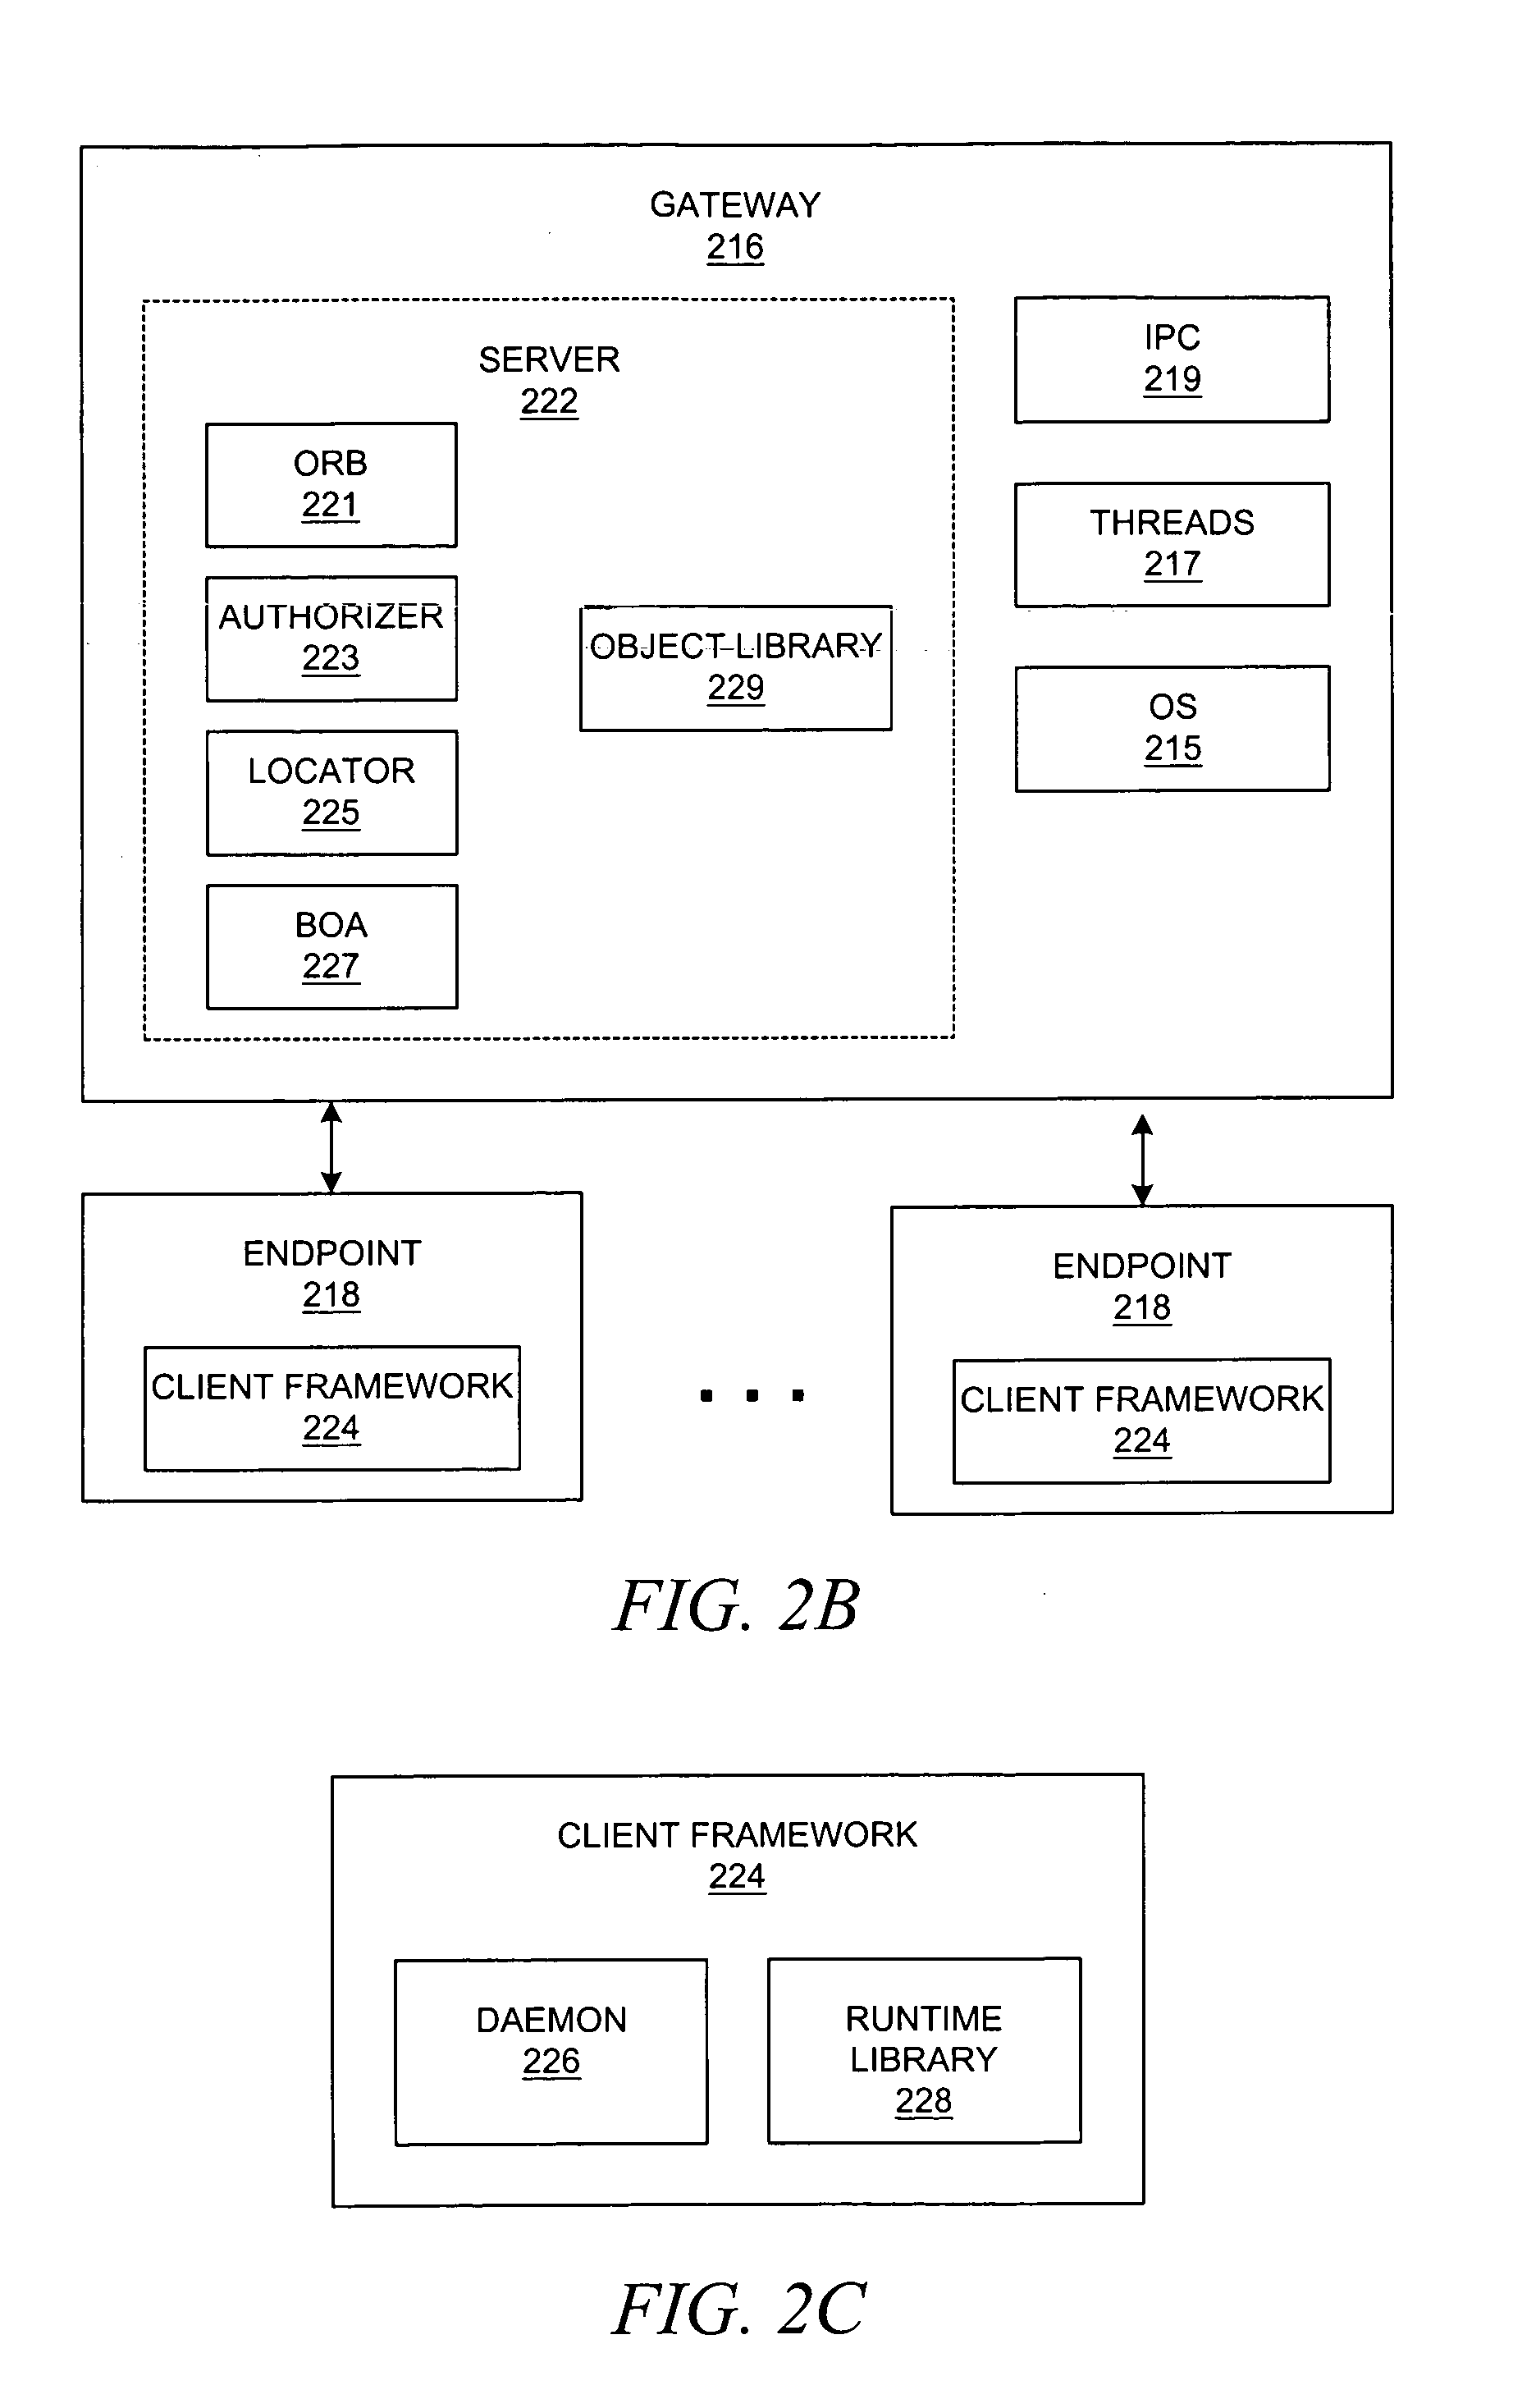 Method and system for network management with adaptive monitoring and discovery of computer systems based on user login